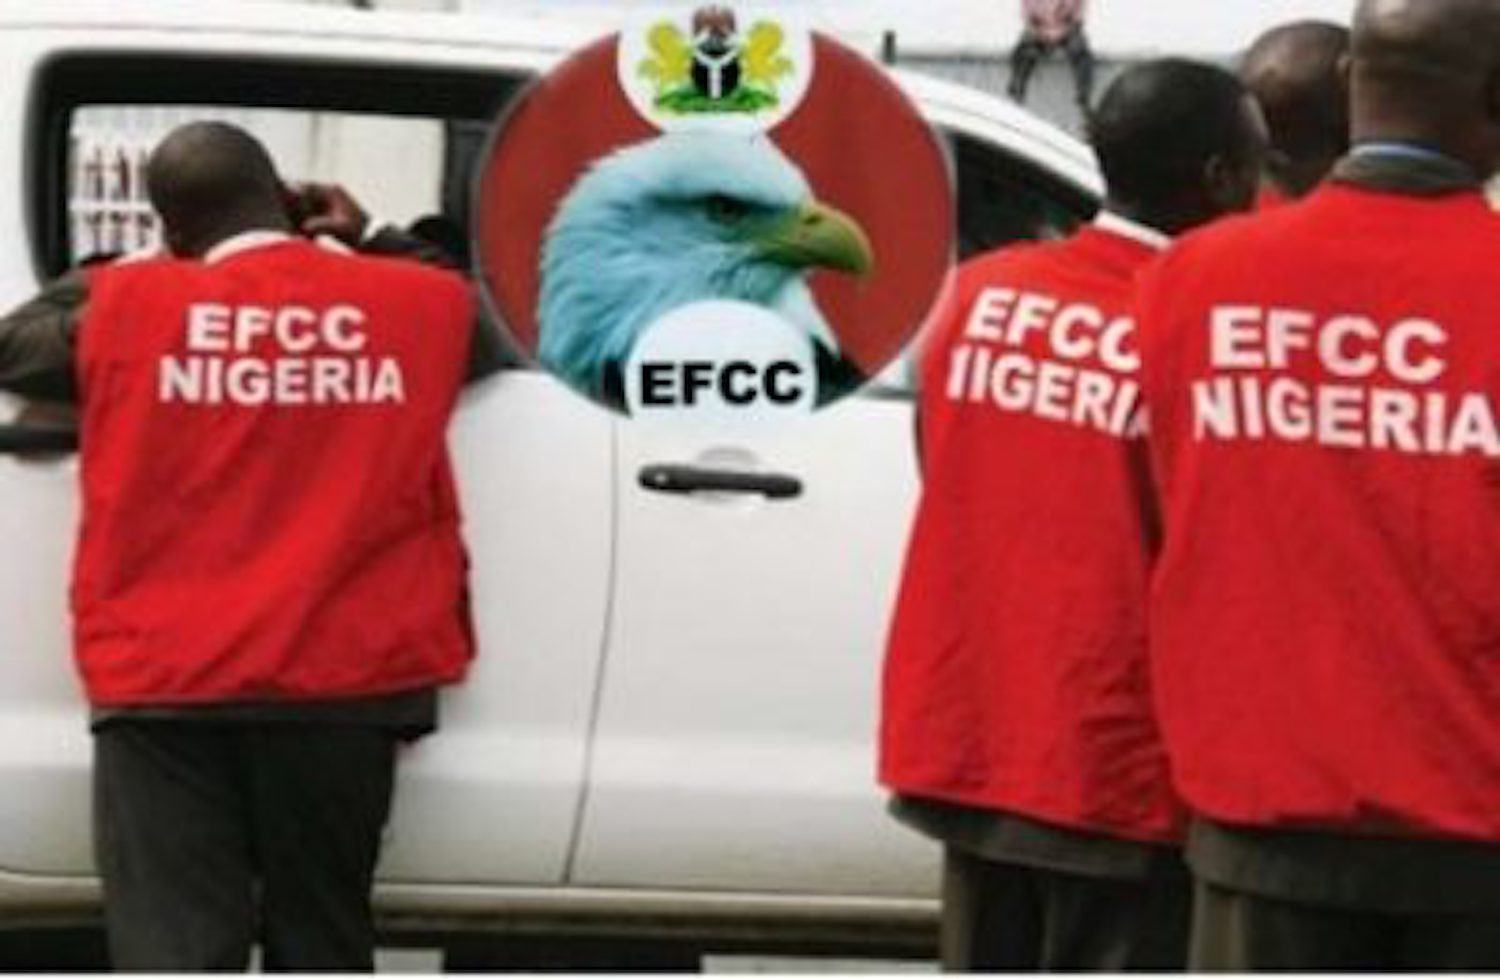 EFCC Needs Nigerians To Win The Fight Against Corruption